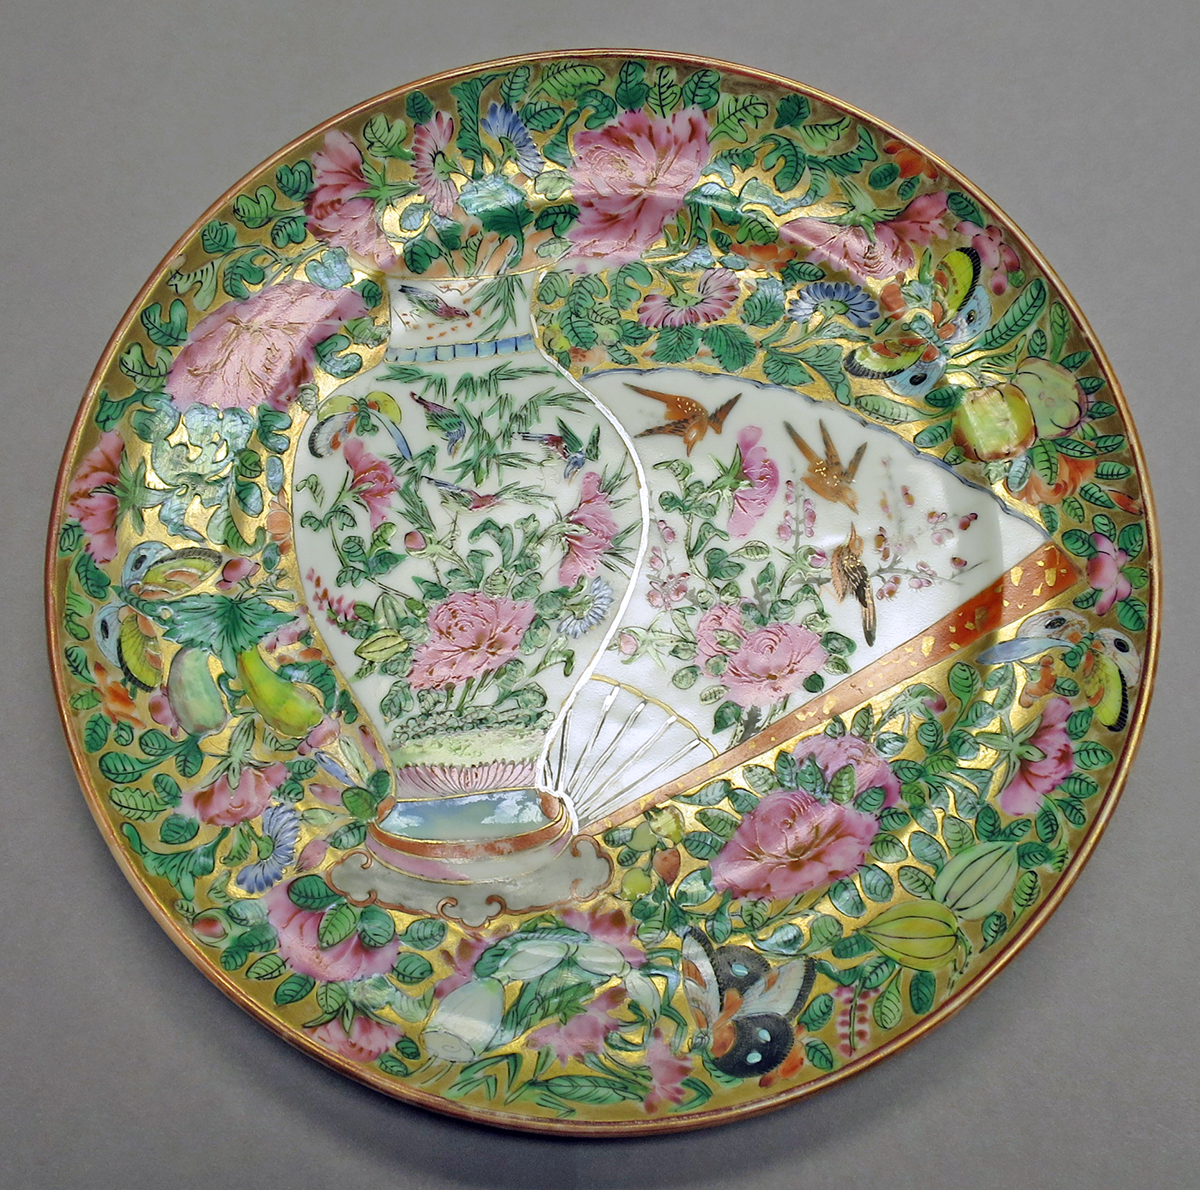 2014.0016.238 Dinner plate front